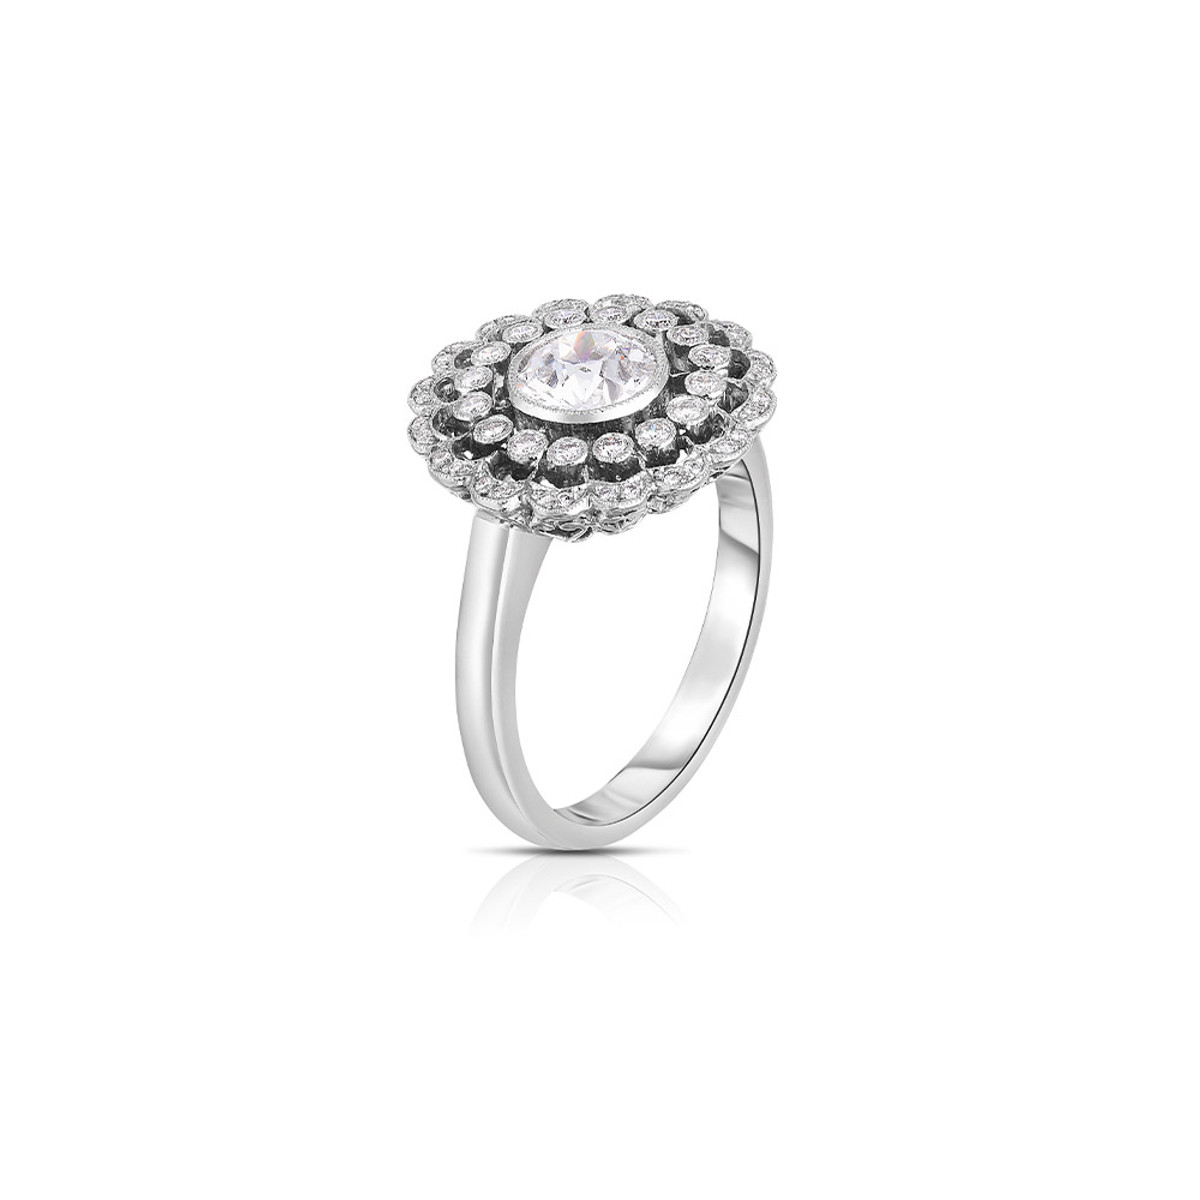 Hyde Park Collection Platinum Diamond Halo Ring-62452 Product Image